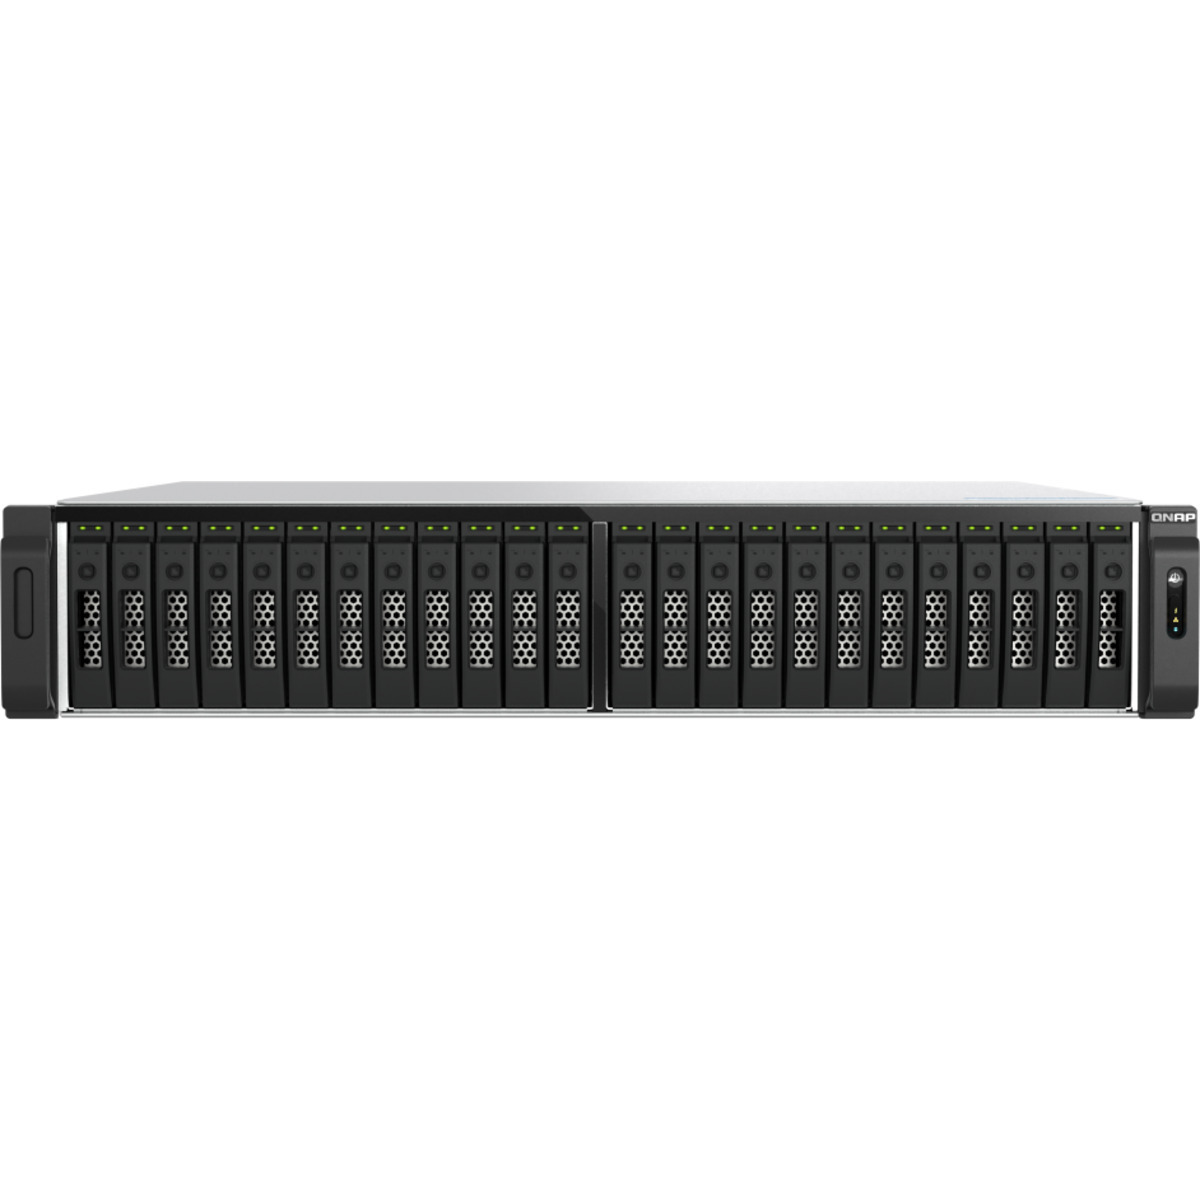 QNAP TS-h3077AFU Ryzen 5 All-Flash ZFS 112tb 30-Bay RackMount Large Business / Enterprise NAS - Network Attached Storage Device 28x4tb Samsung 870 QVO MZ-77Q4T0 2.5 560/530MB/s SATA 6Gb/s SSD CONSUMER Class Drives Installed - Burn-In Tested TS-h3077AFU Ryzen 5 All-Flash ZFS